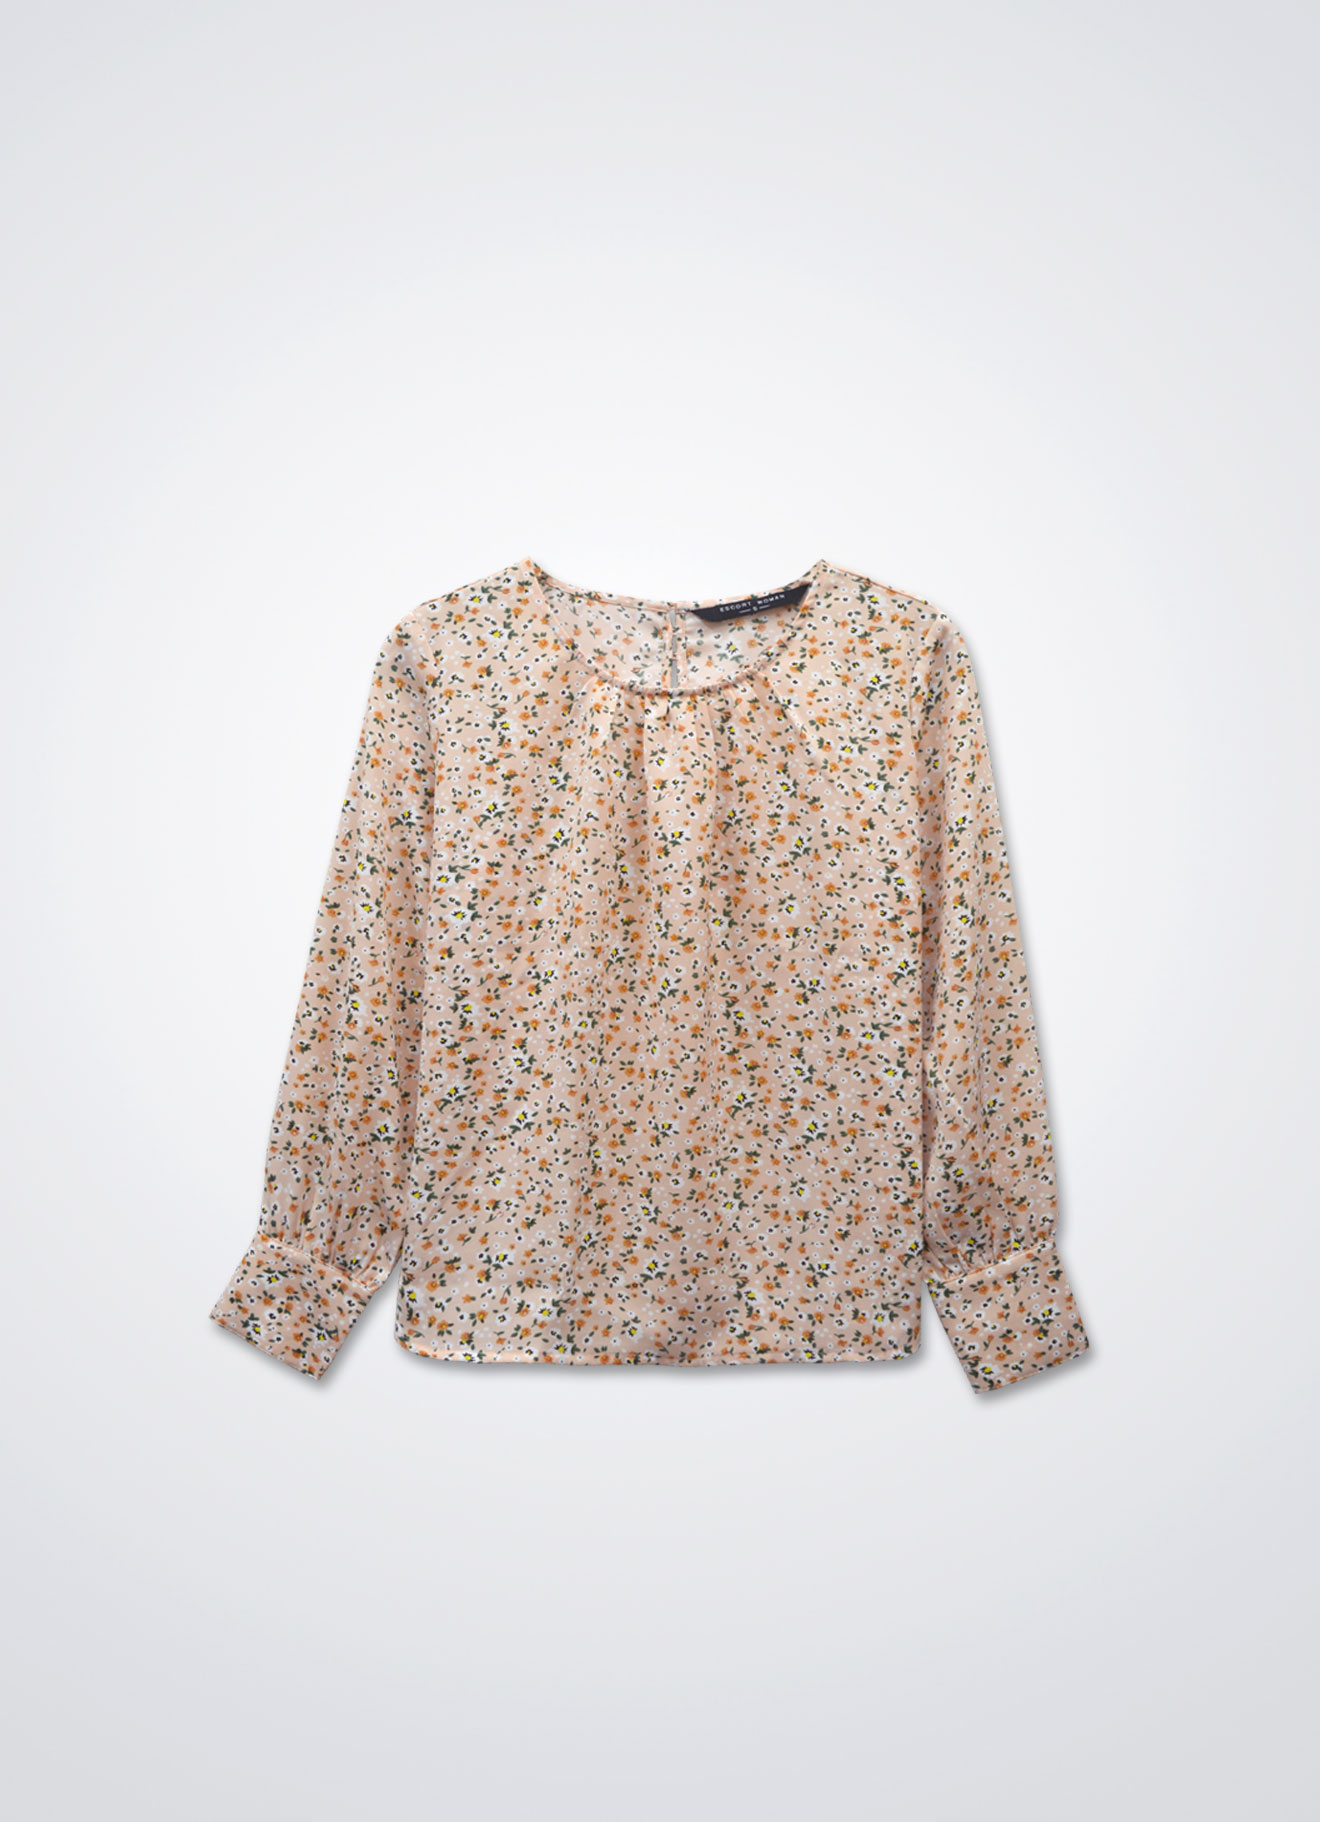 Bisque by Printed Blouse